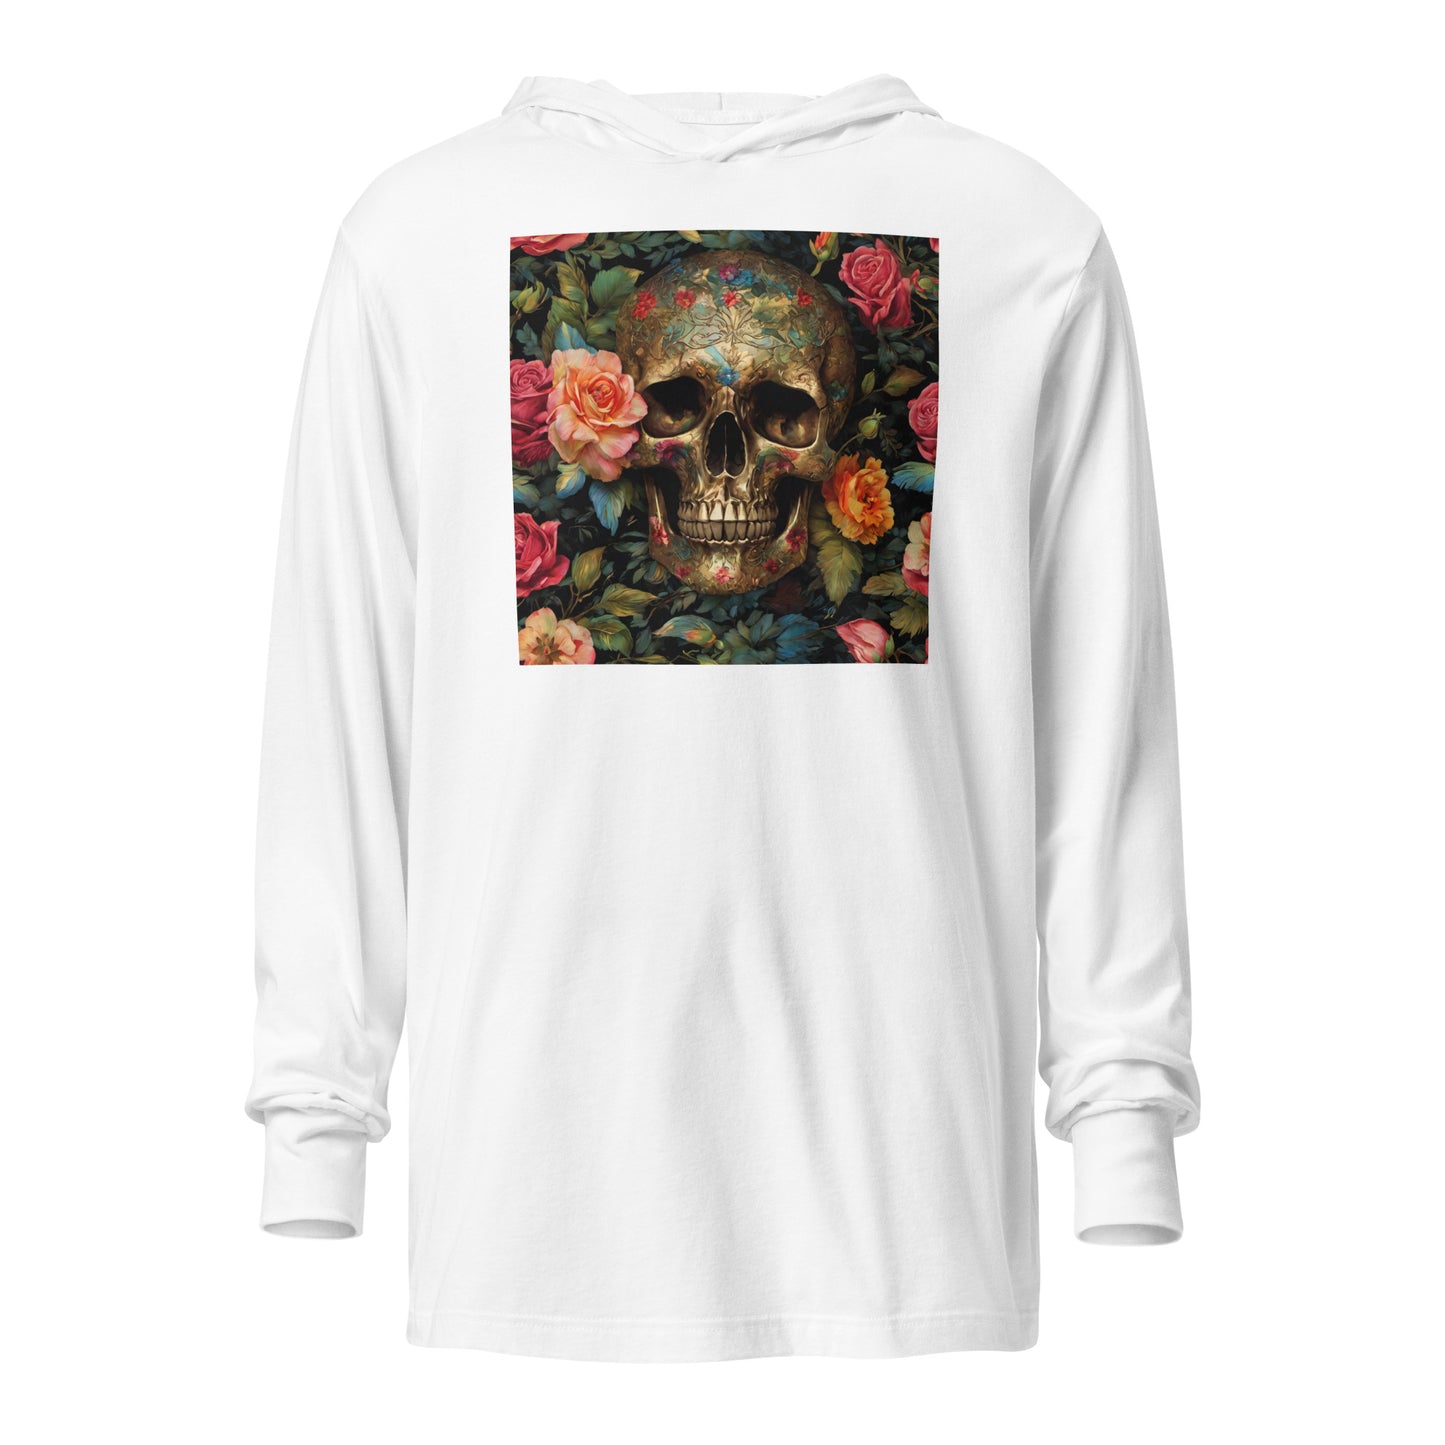 Skull and Roses Graphic Hooded Long-Sleeve Tee White